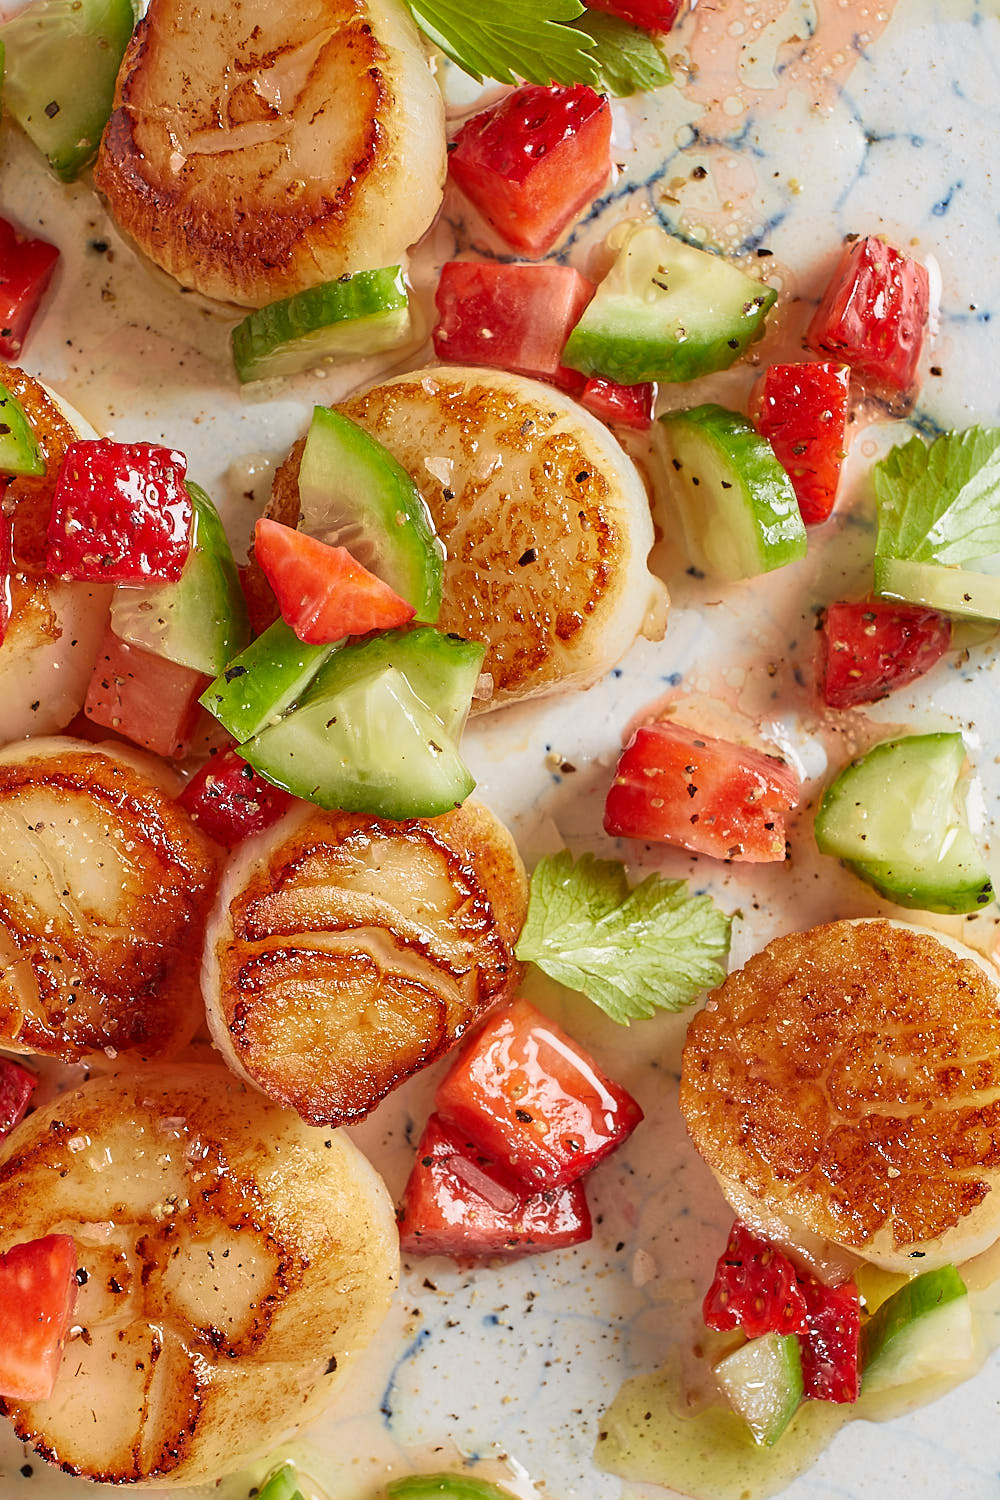 Scallops with strawberry salad detailed food 